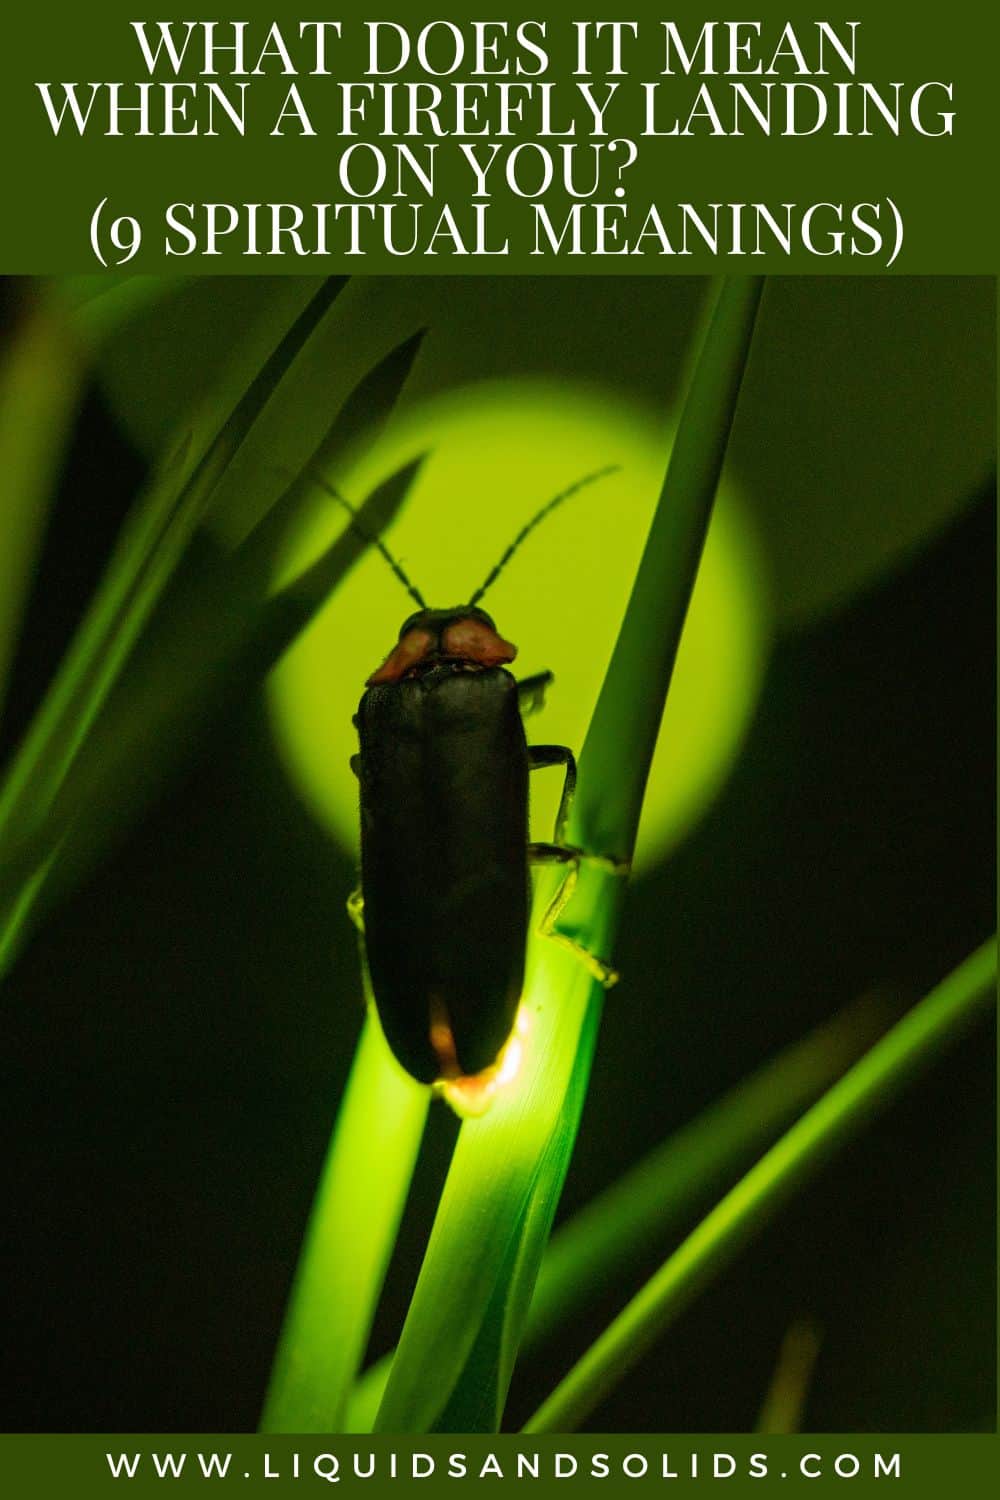 What Does It Mean When A Firefly Landing on You? (9 Spiritual Meanings)